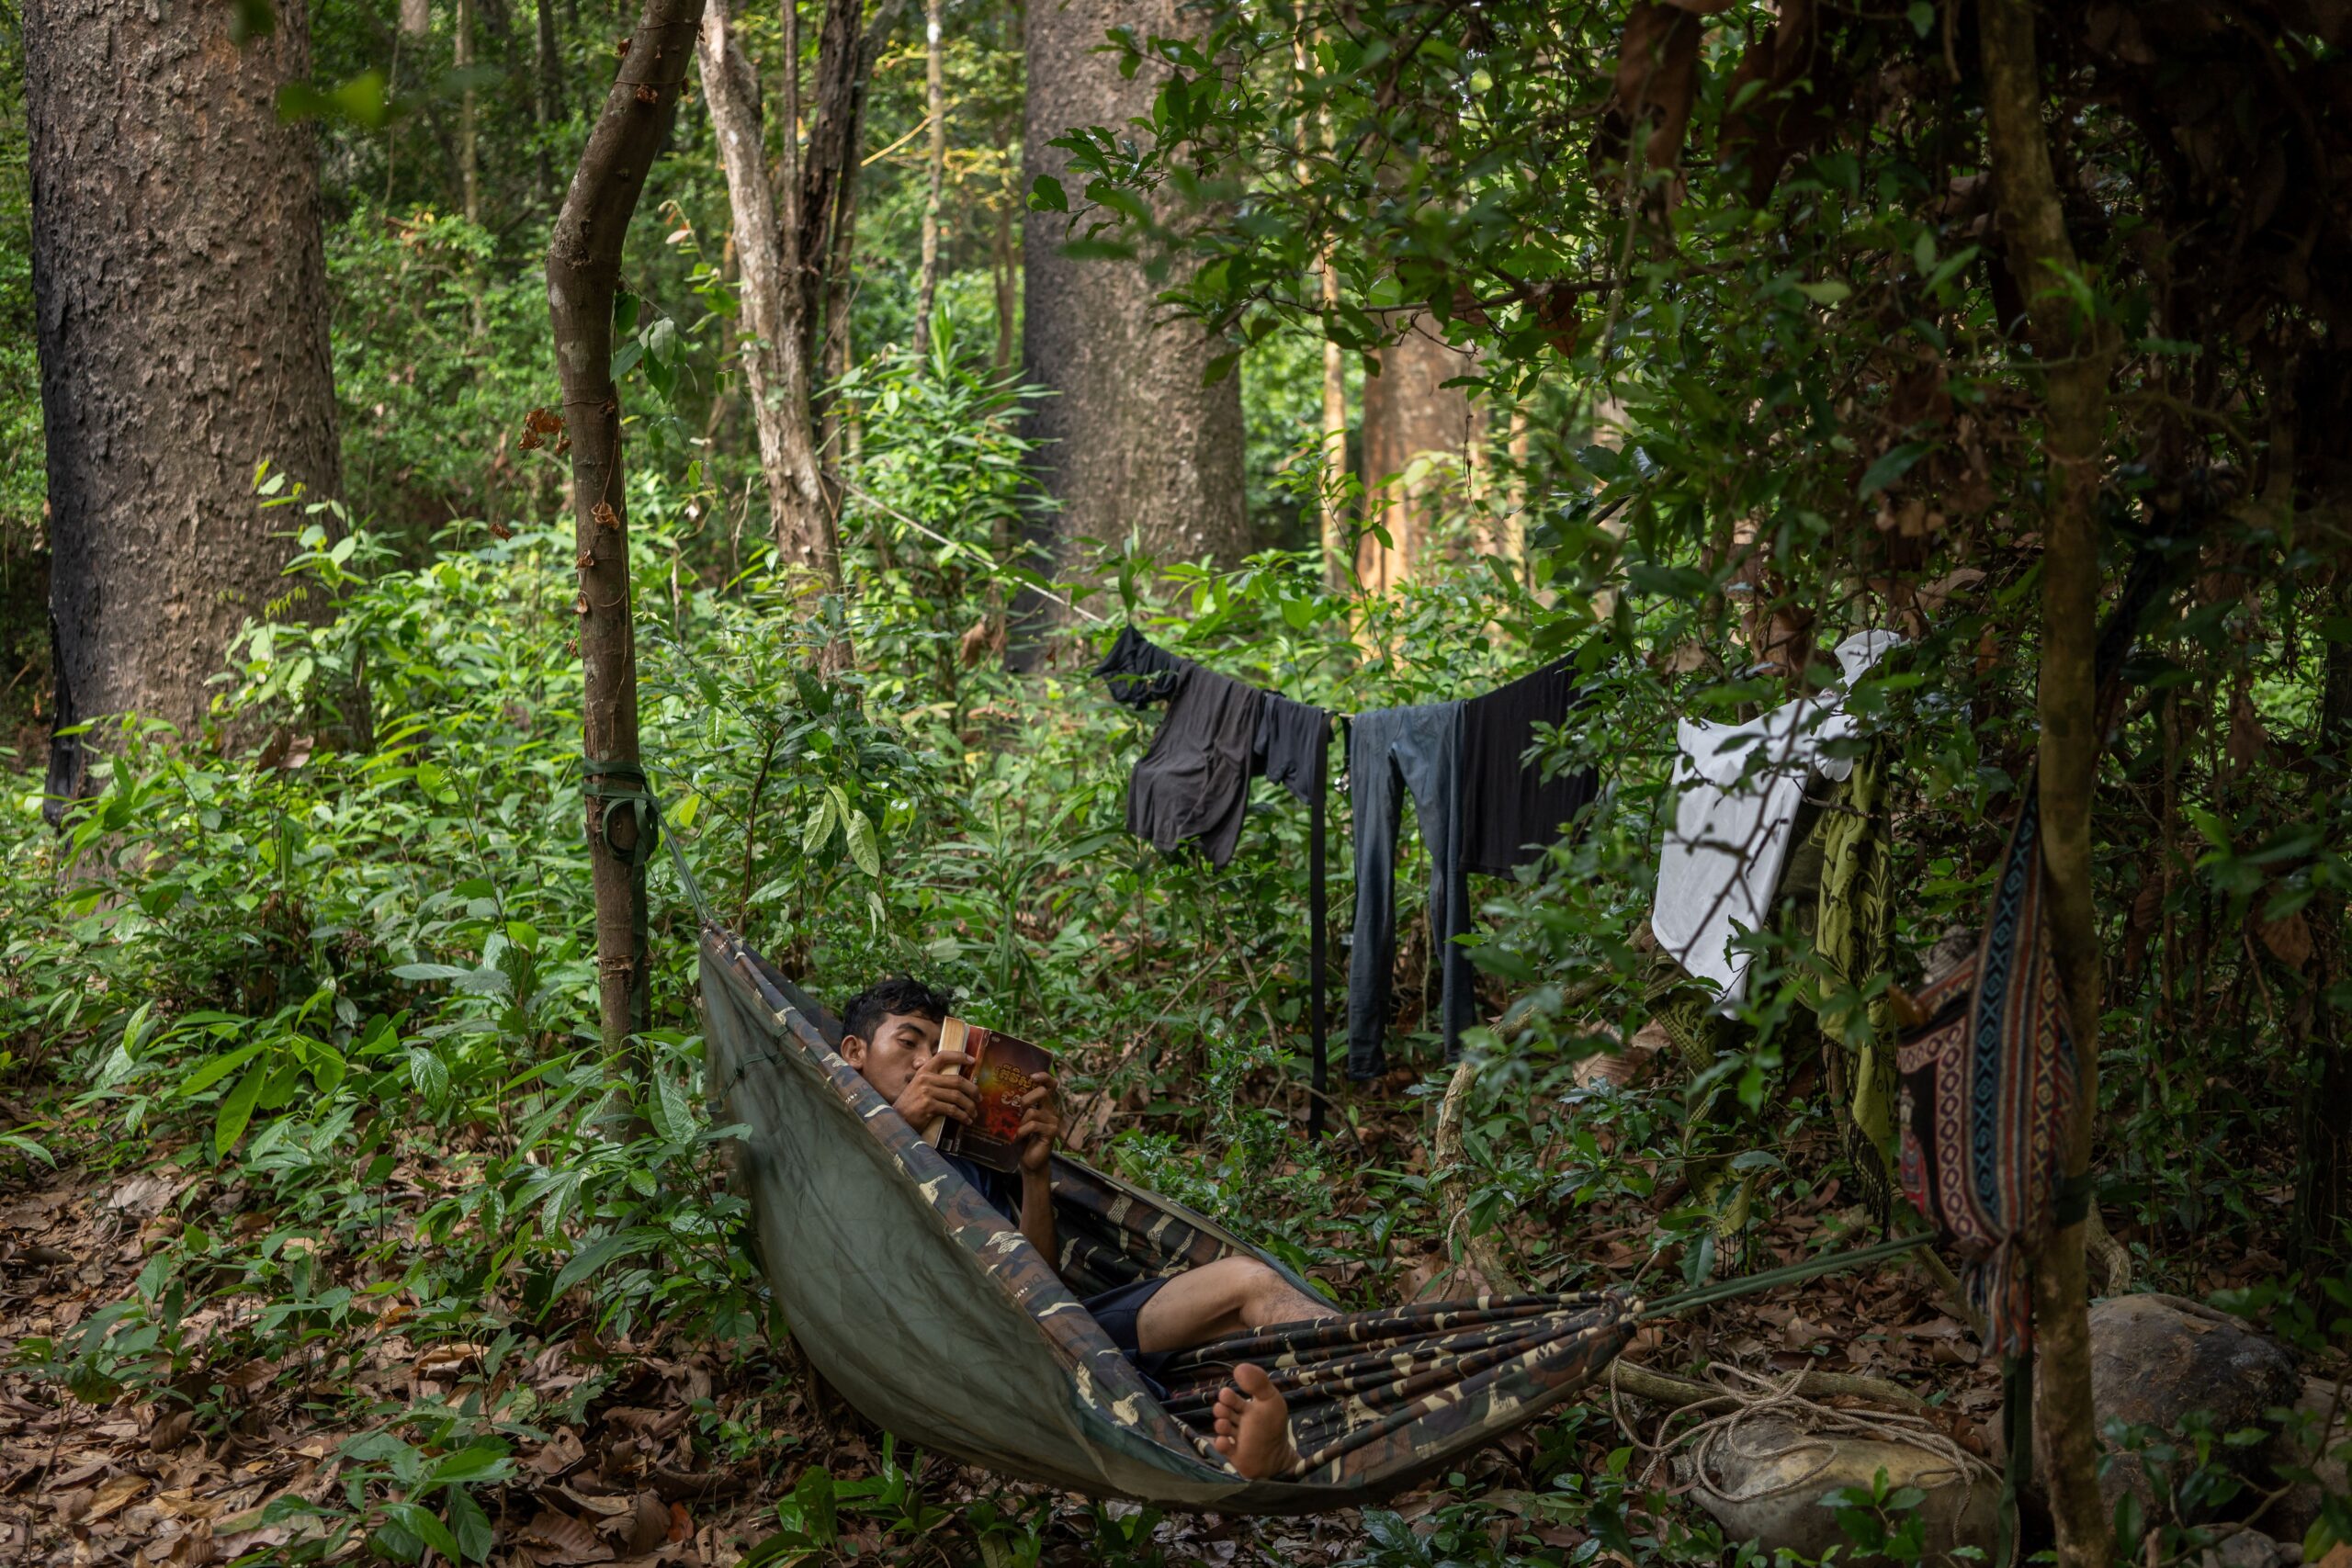 A member of the Prey Preah Roka Community Network reads a book at the makeshift camp one morning before the patrol resumes its path through the protected forest. Image by Andy Ball / Mongabay.